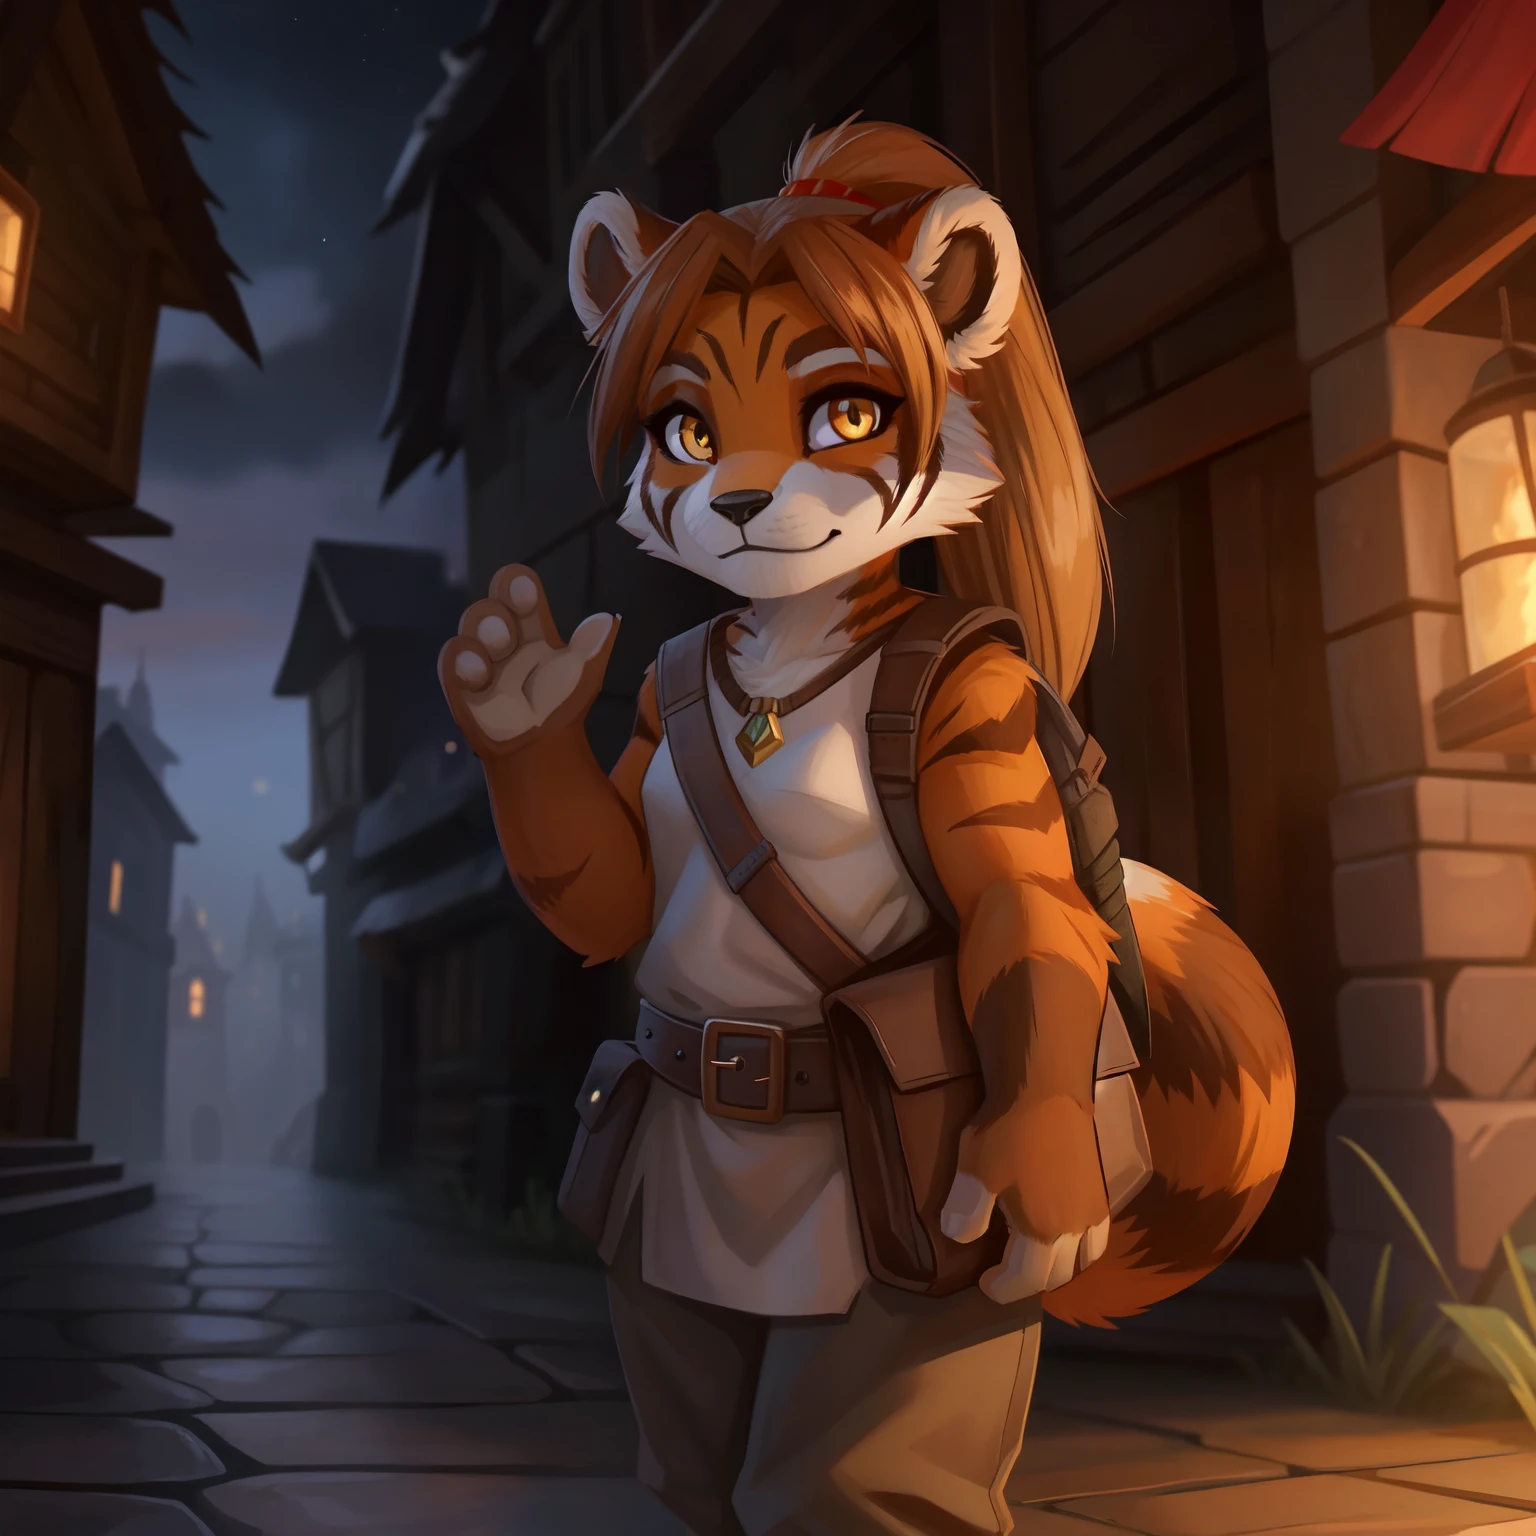 small_animal_ears, small_panda_ears, pandaren, world_of_warcraft, anthropomorphic, long_brown_ponytail, yellow_eyes, amber_eyes, 1female, fantasy, long_fluffy_tail, foxtail, original_character, red_panda, flat_chest, 4fingers, small_girl, tiger_stripes, backpack, rucksack, full_body, cobblestone_streets, stormwind_city, stormwind, medival_city, white_ears_with_red_inner_fur,